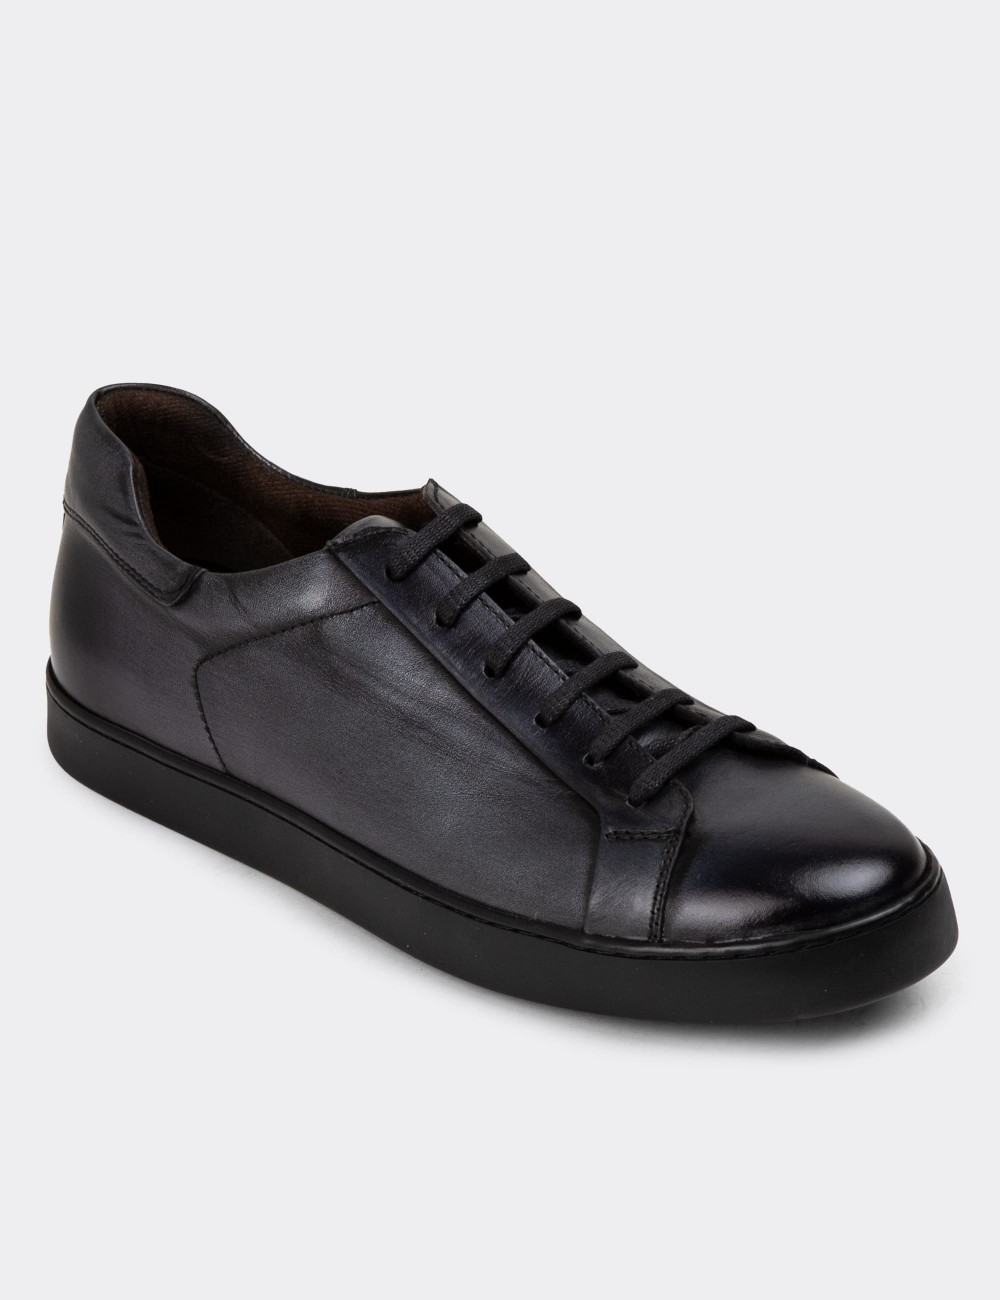 Anthracite Leather Sneakers - 01955MANTC01